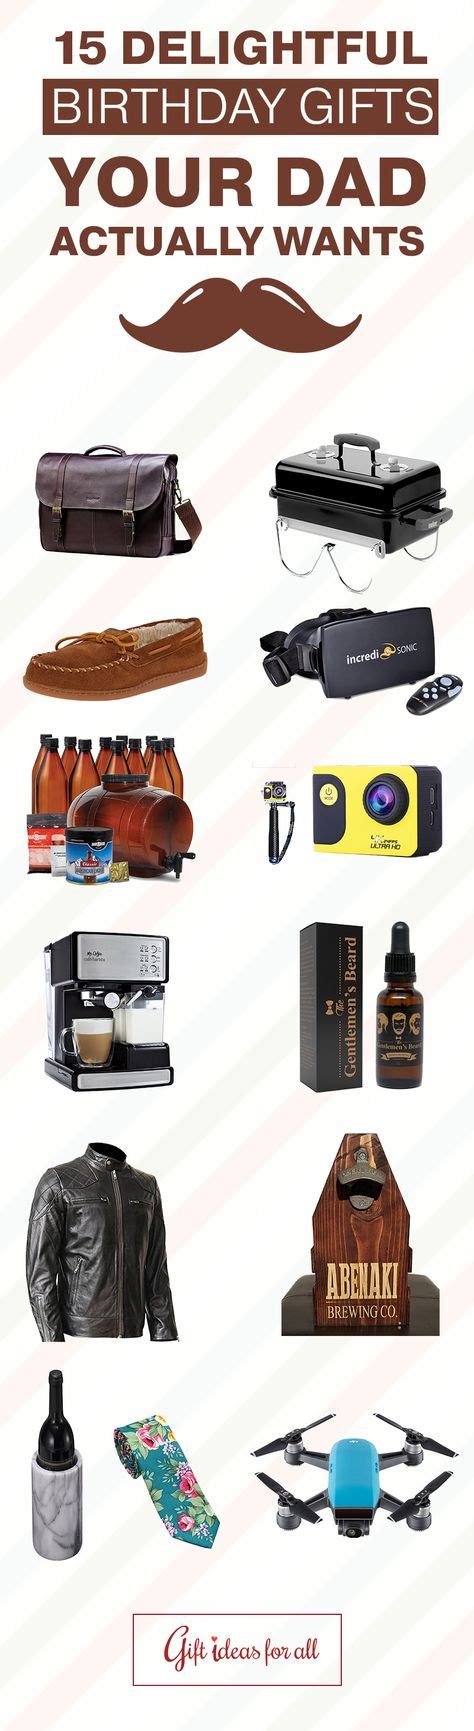 Delightful Birthday Gifts Your Dad Actually Wants Birthday Gifts Dad Birthday Gift Unique